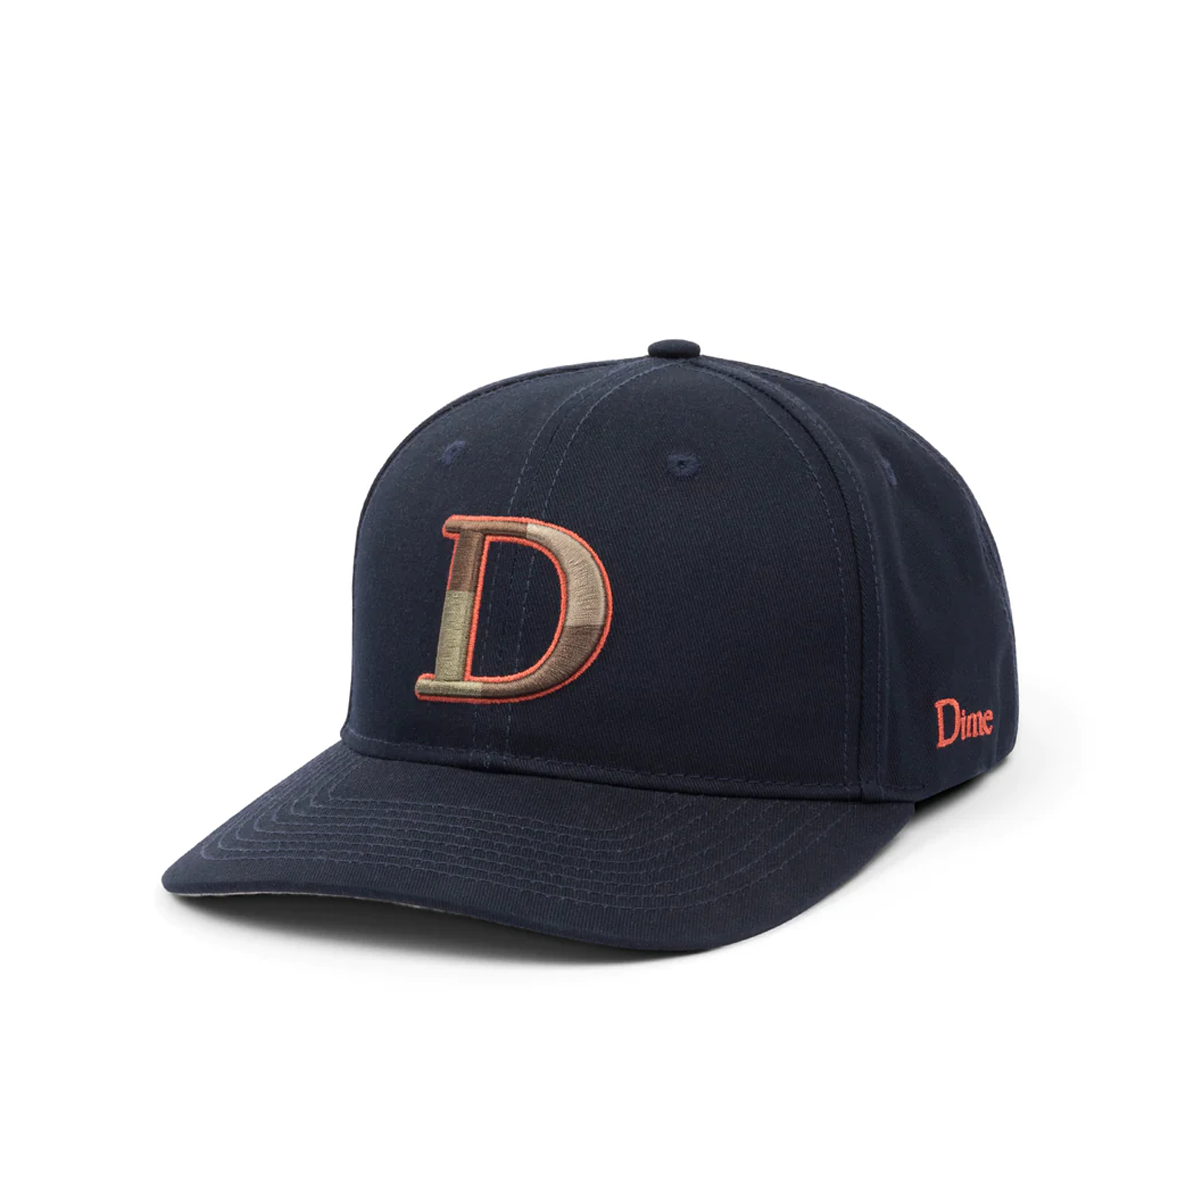 Dime D Full Fit Snapback Hat - Assorted